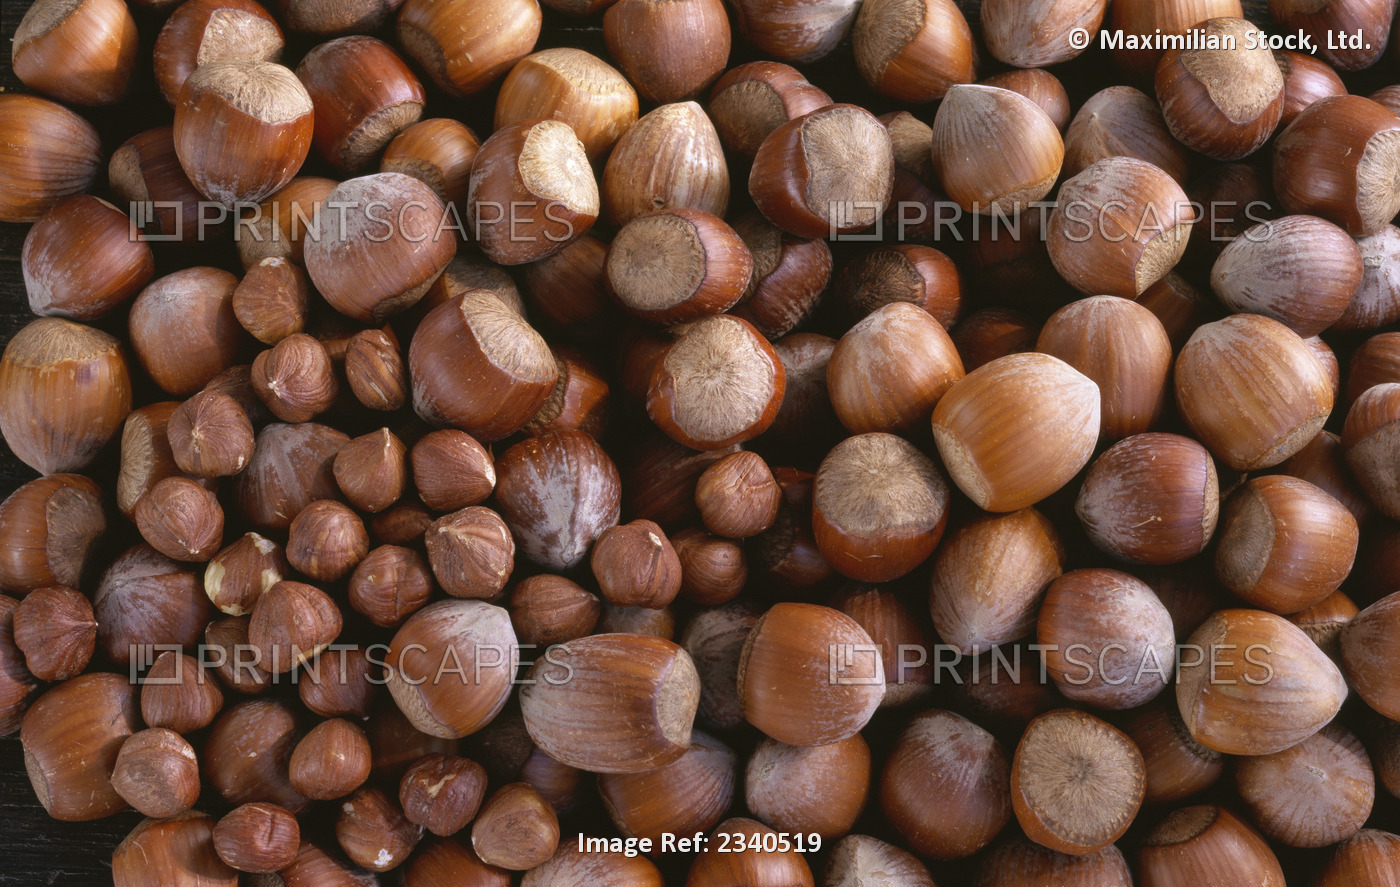 Agriculture - Hazelnuts, shelled and unshelled; studio.